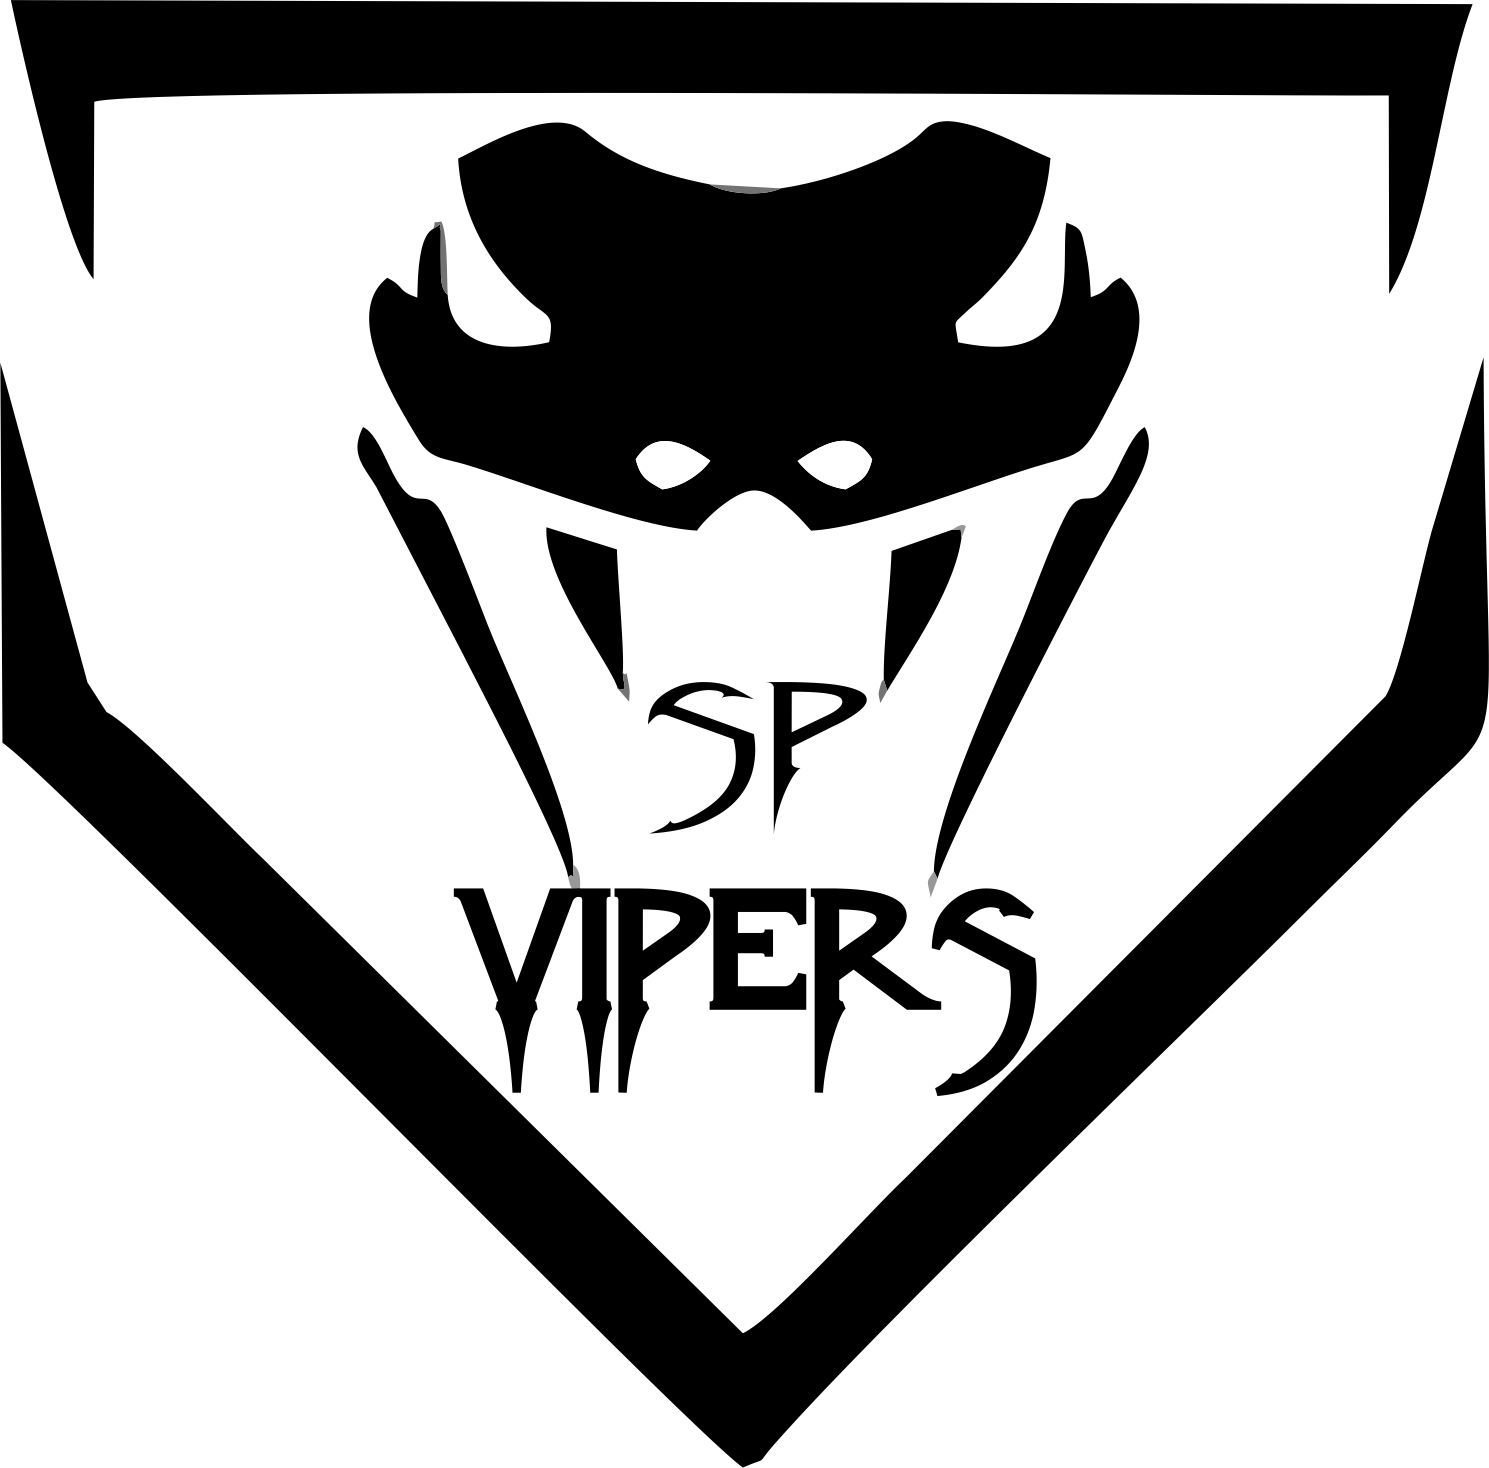 Vipers Window Decal 5"